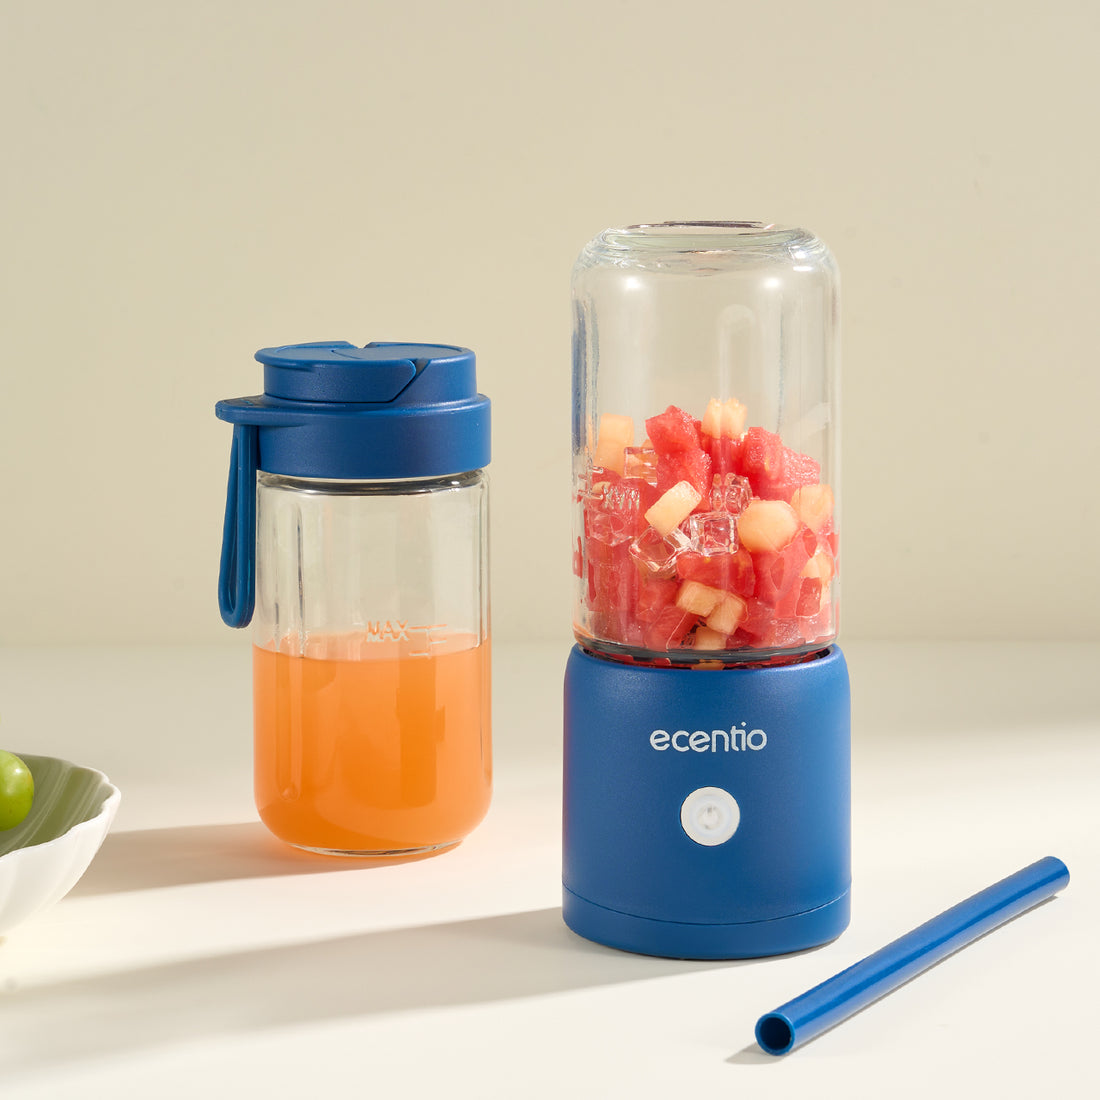 Juicer vs Blender: What's the Difference?Which Should You Buy?